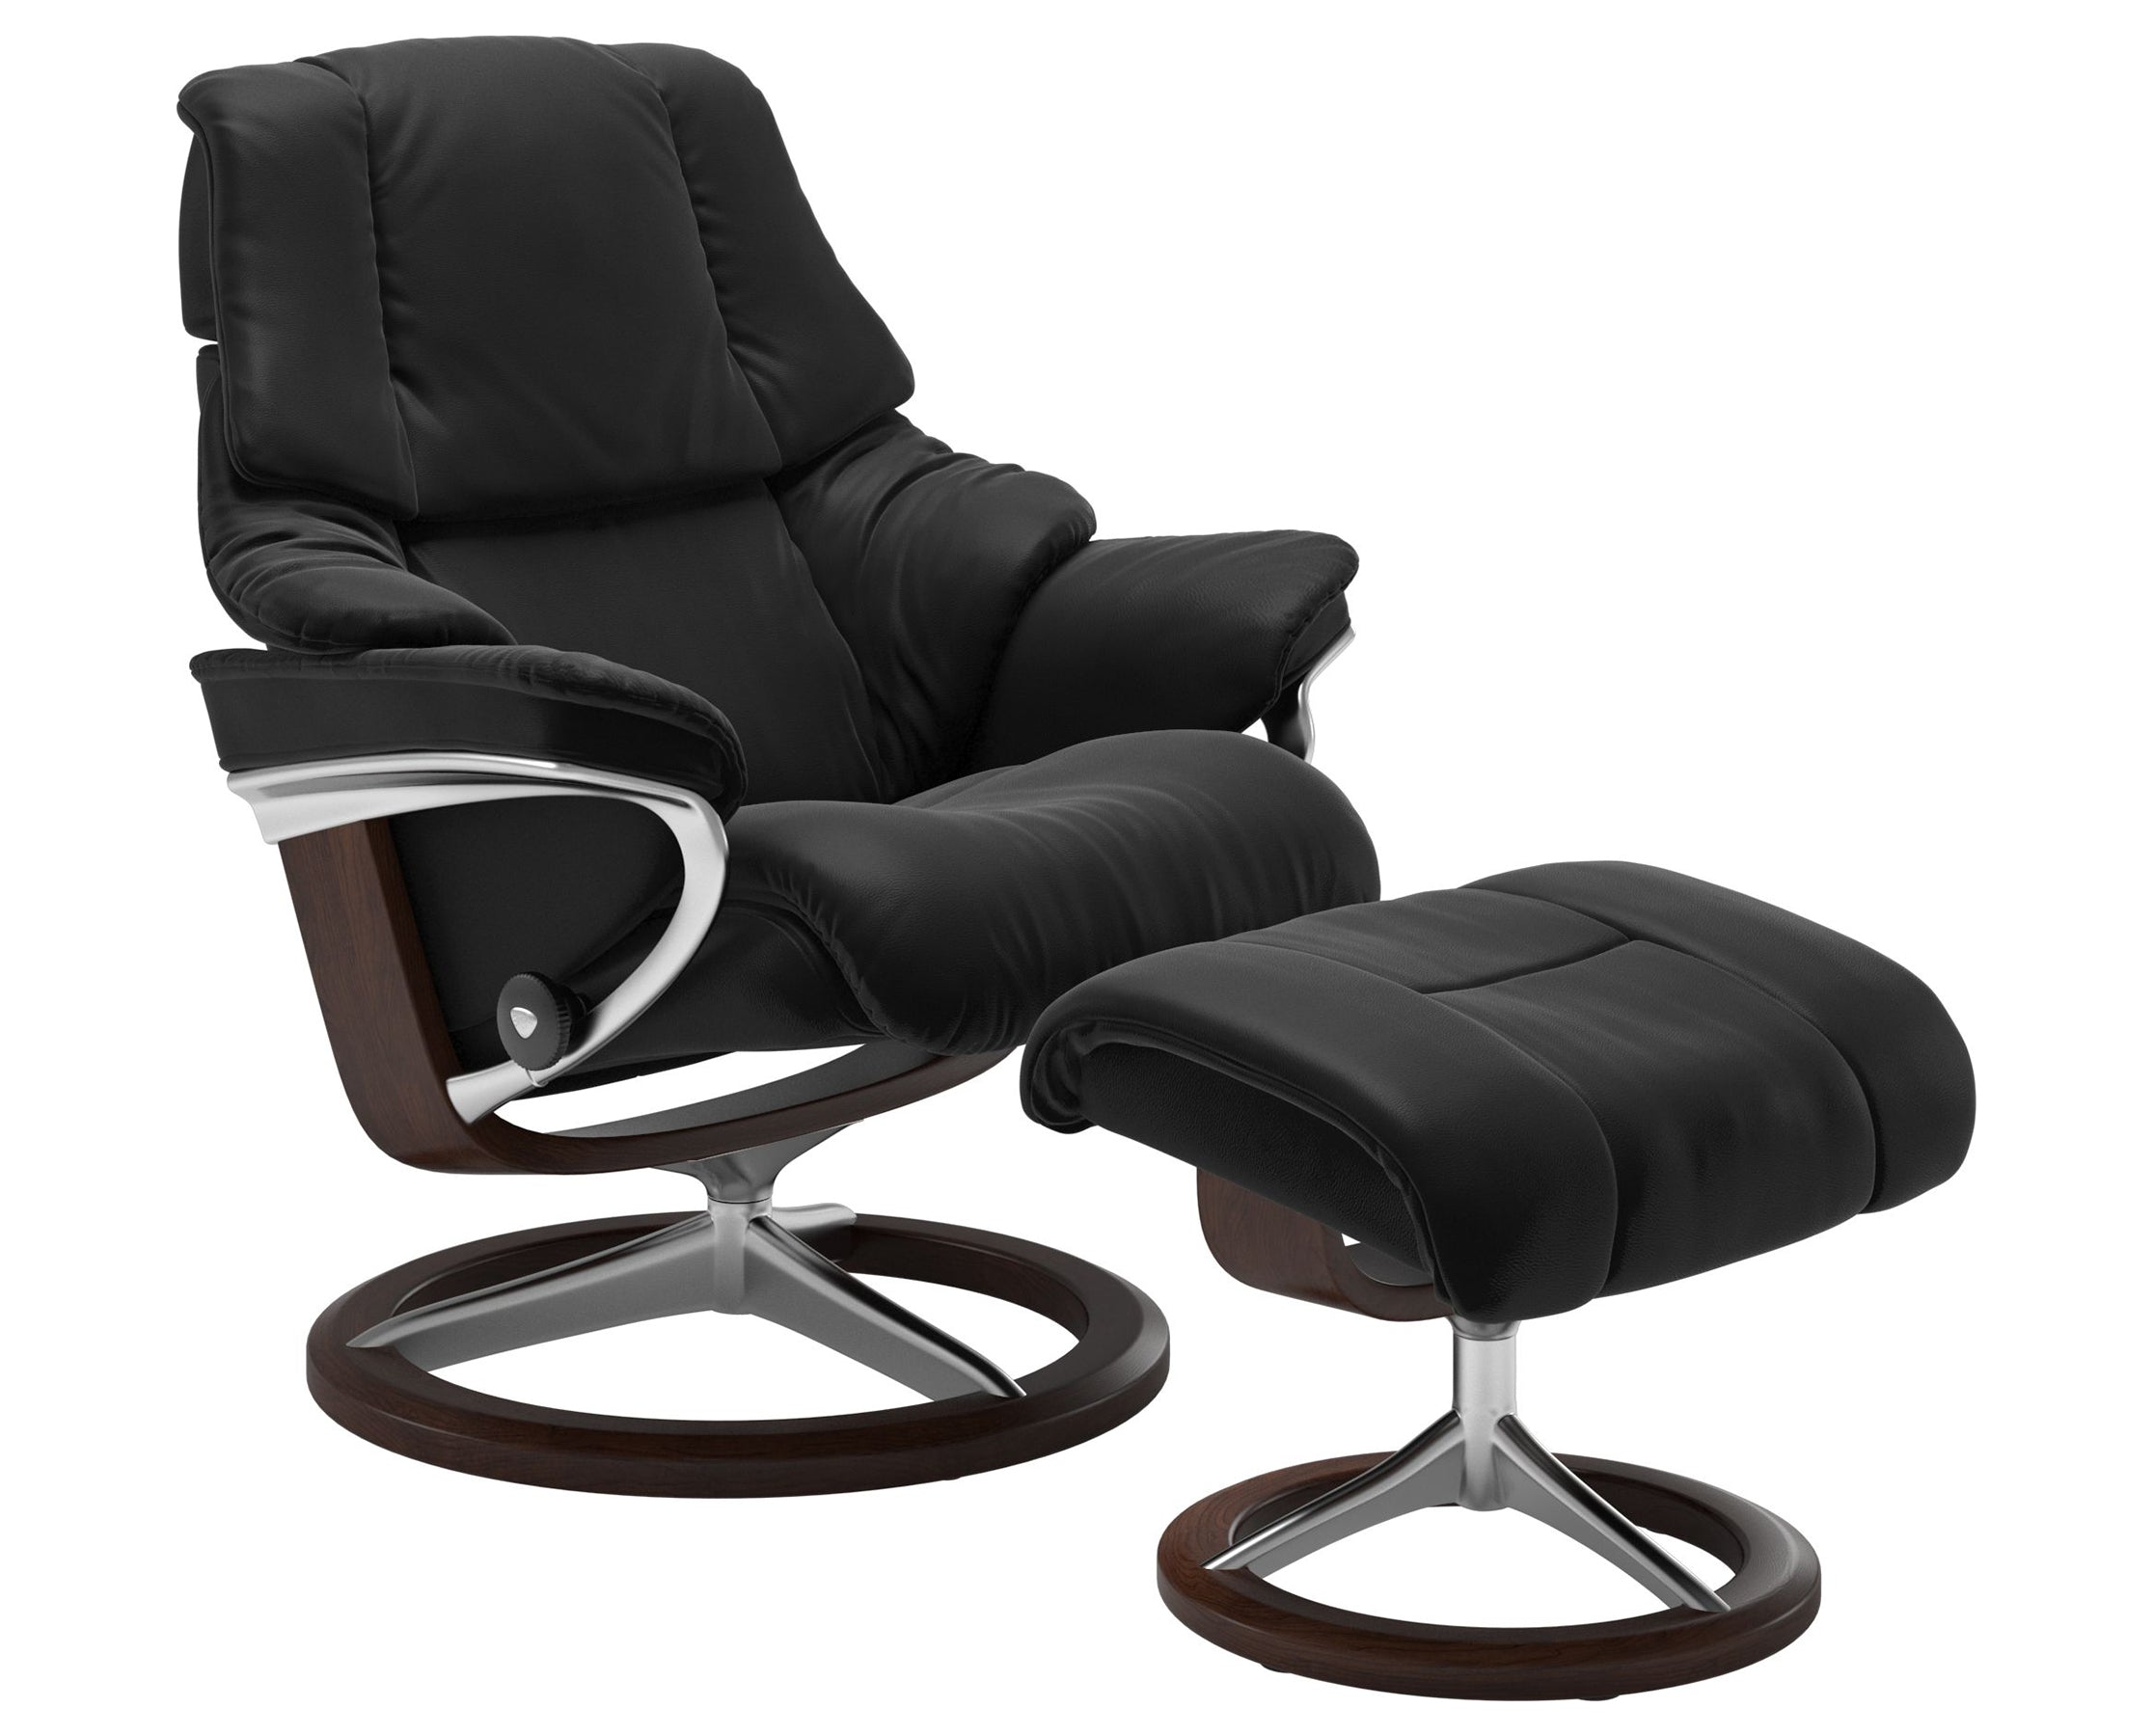 Paloma Leather Black S/M/L and Brown Base | Stressless Reno Signature Recliner | Valley Ridge Furniture